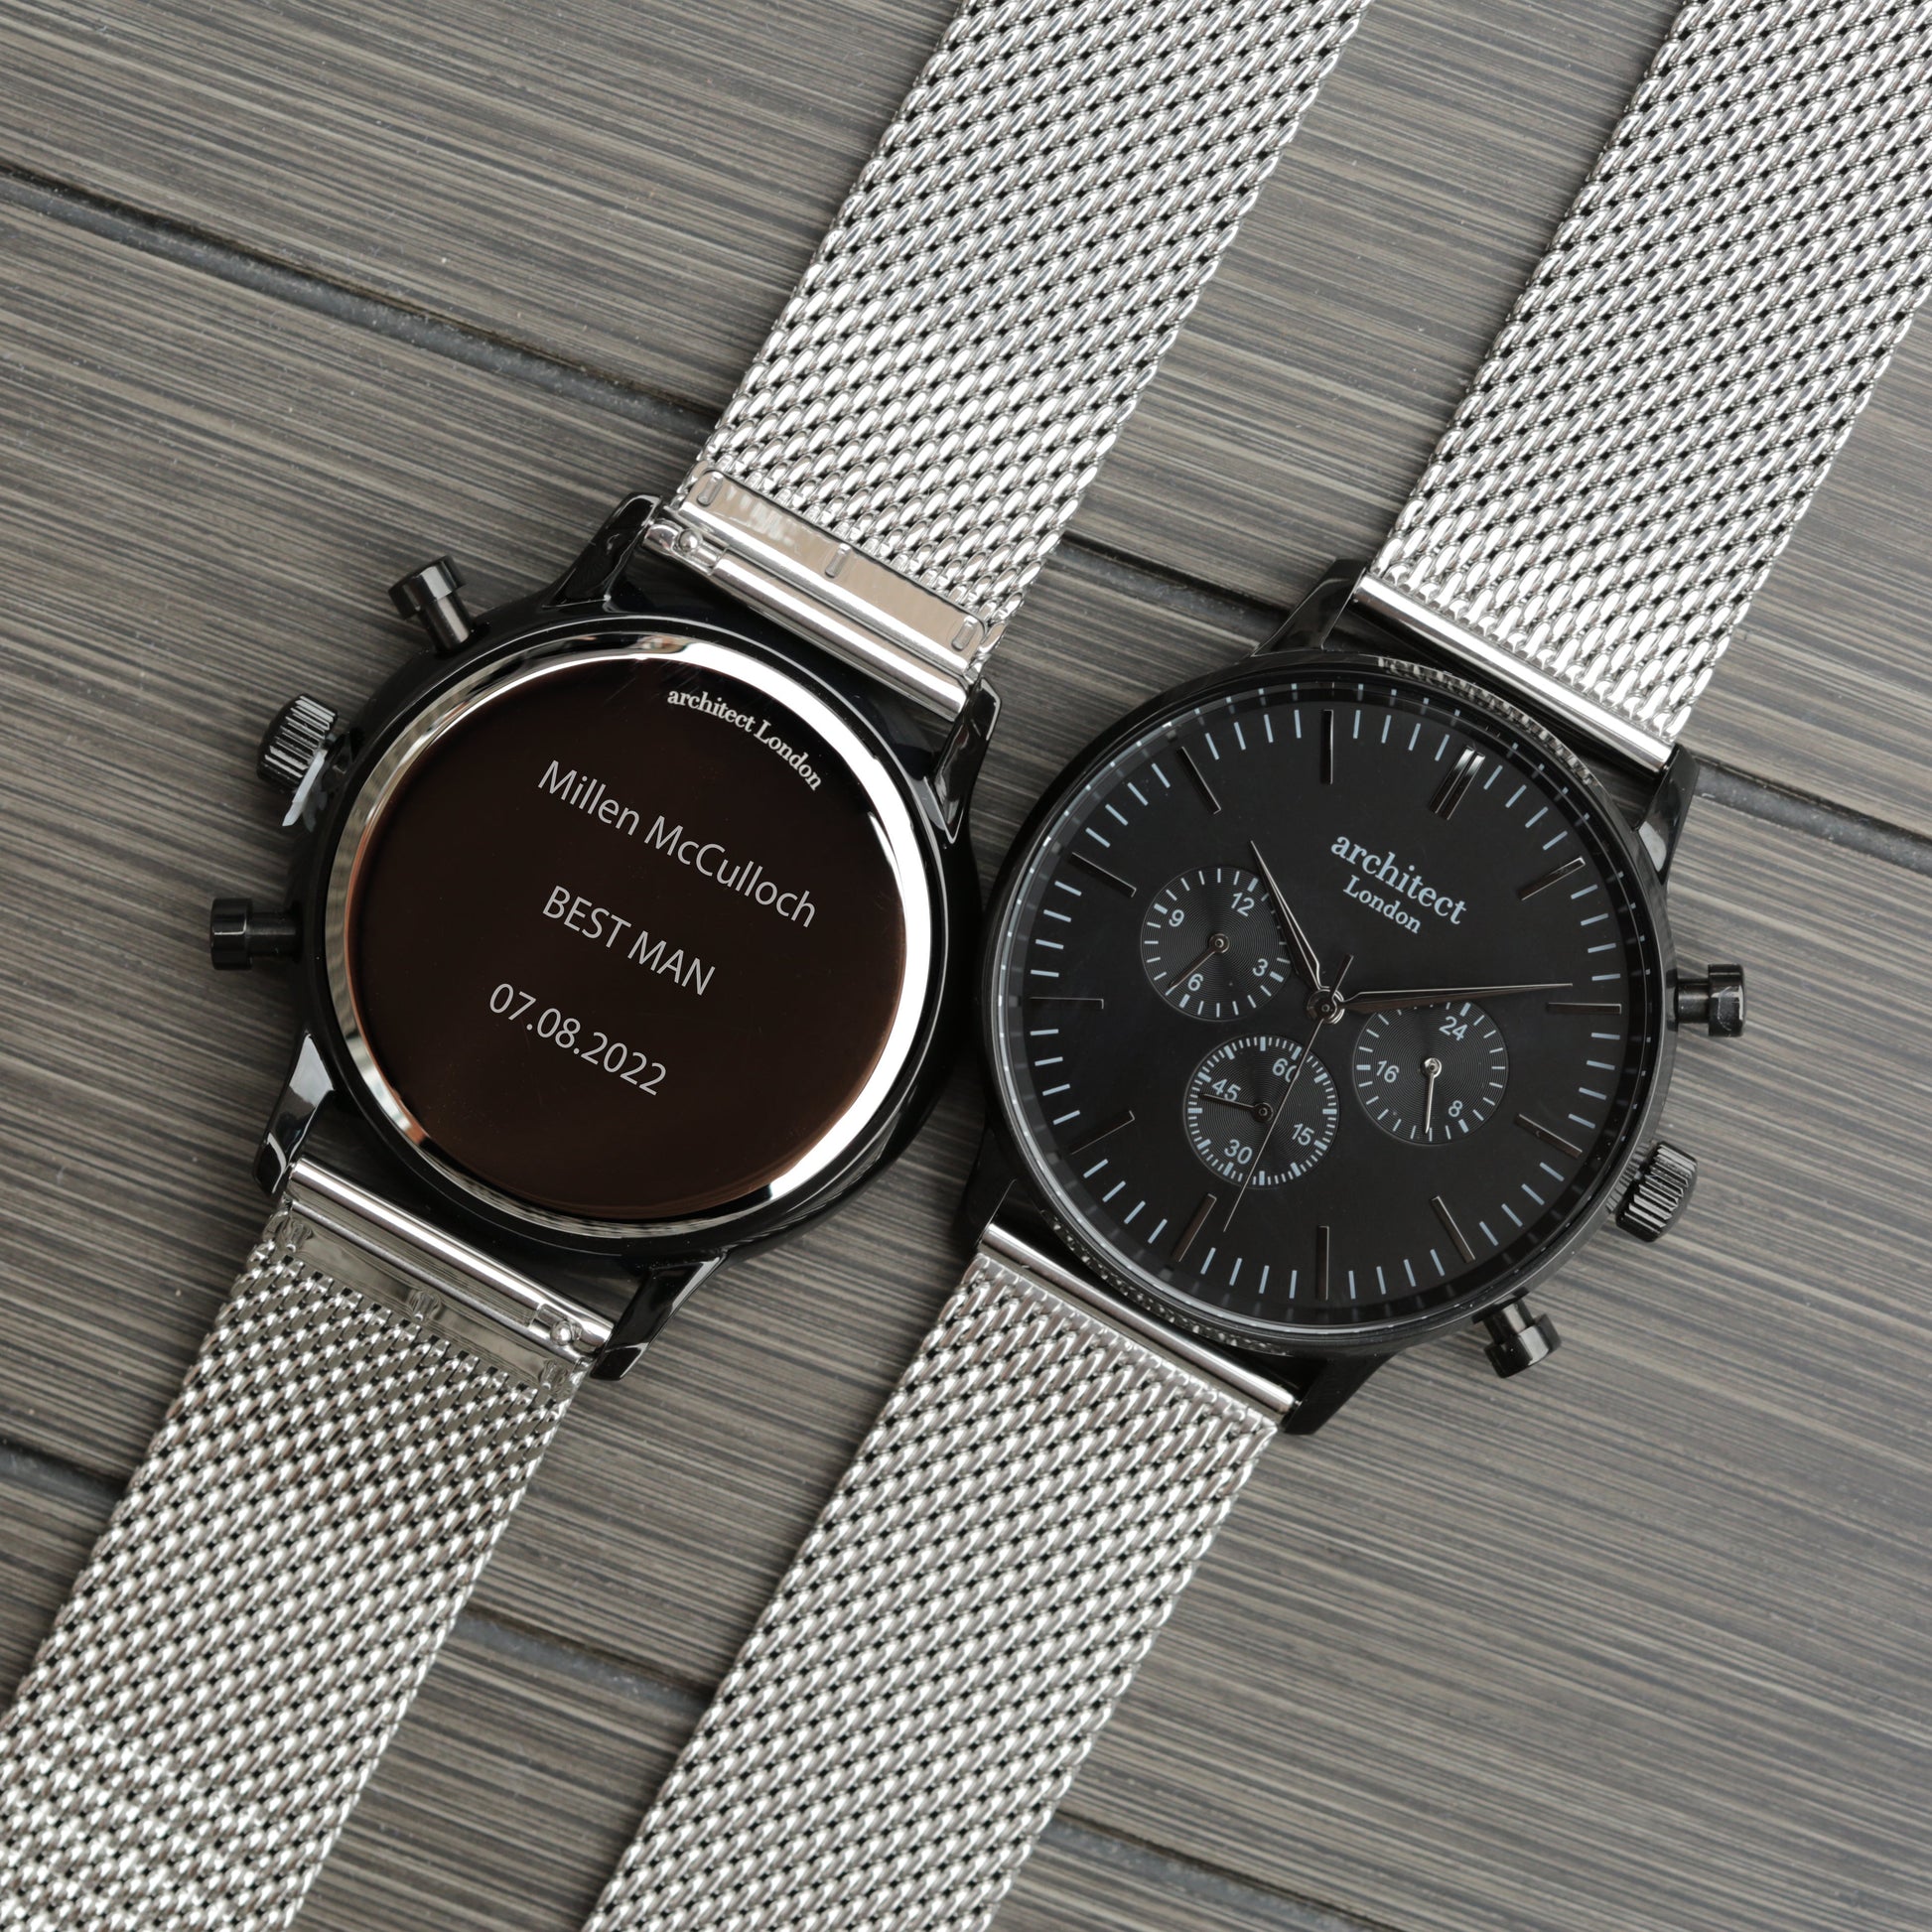 Personalized Men's Watches - Men's Architect Personalized Watch In Black & Silver 